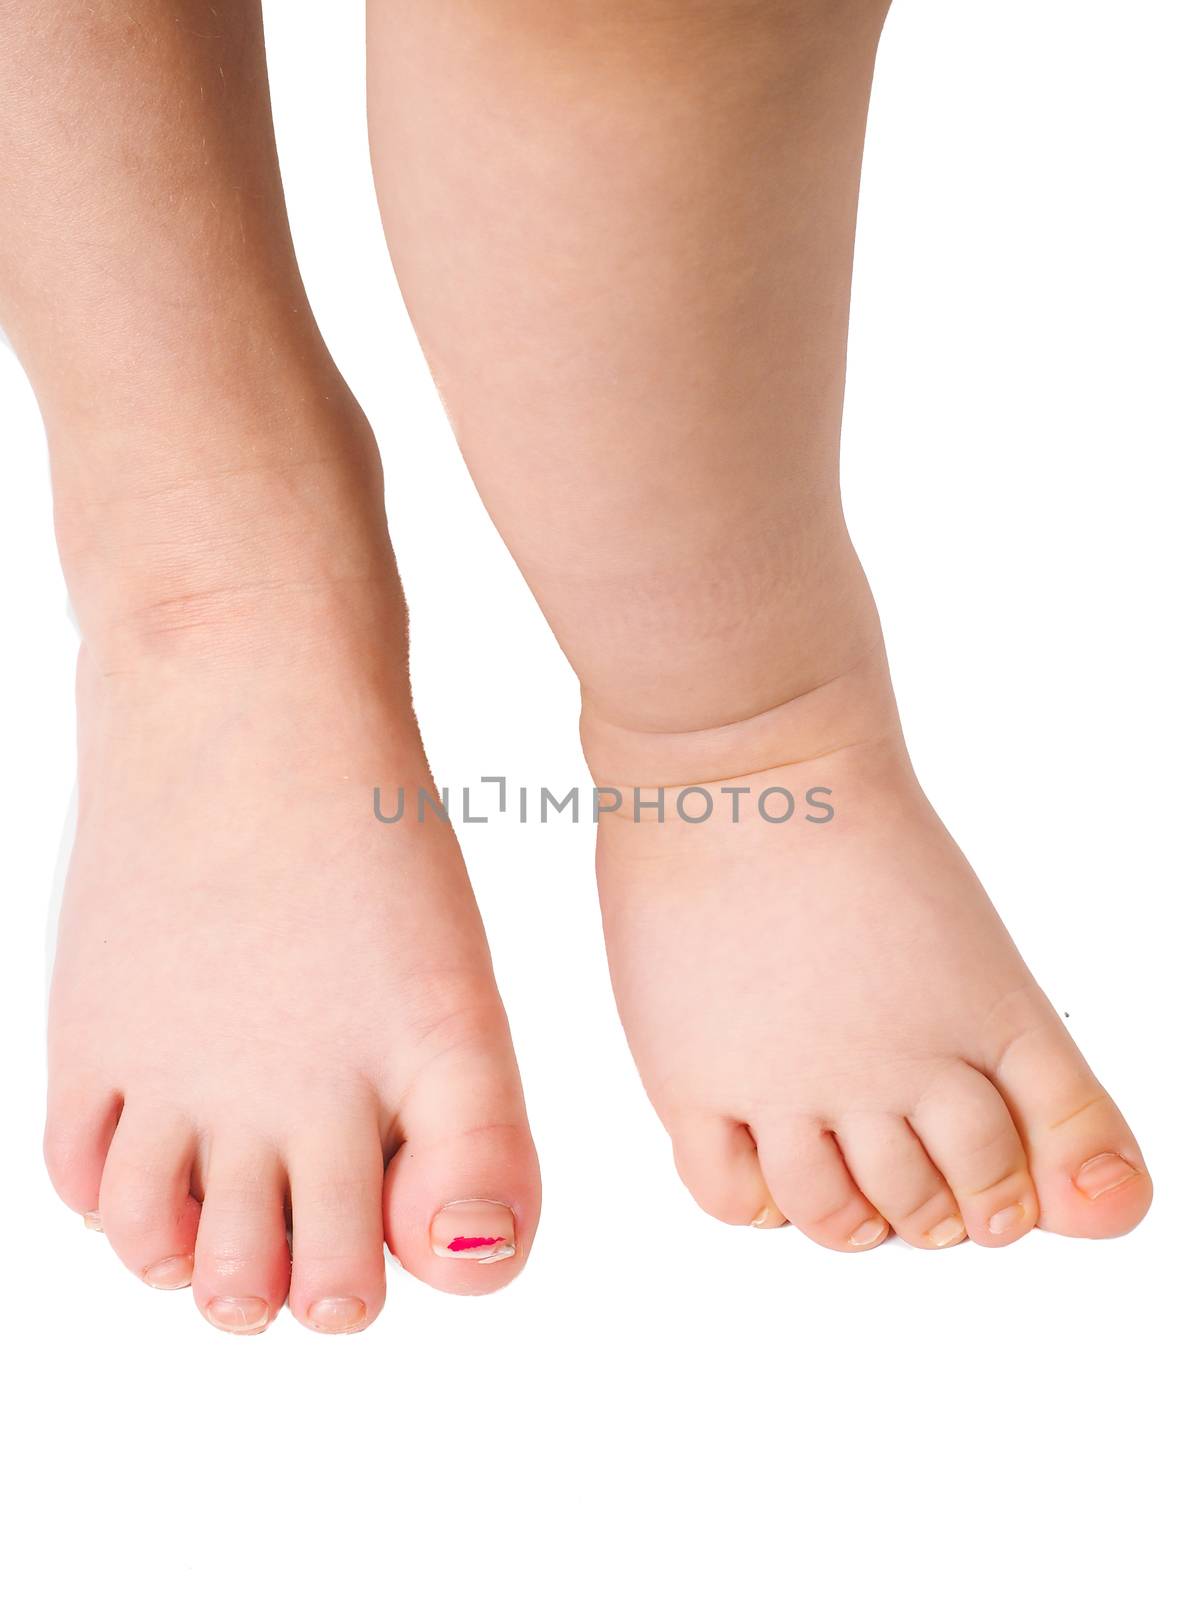 Barefoot young children standing towards isolated white background